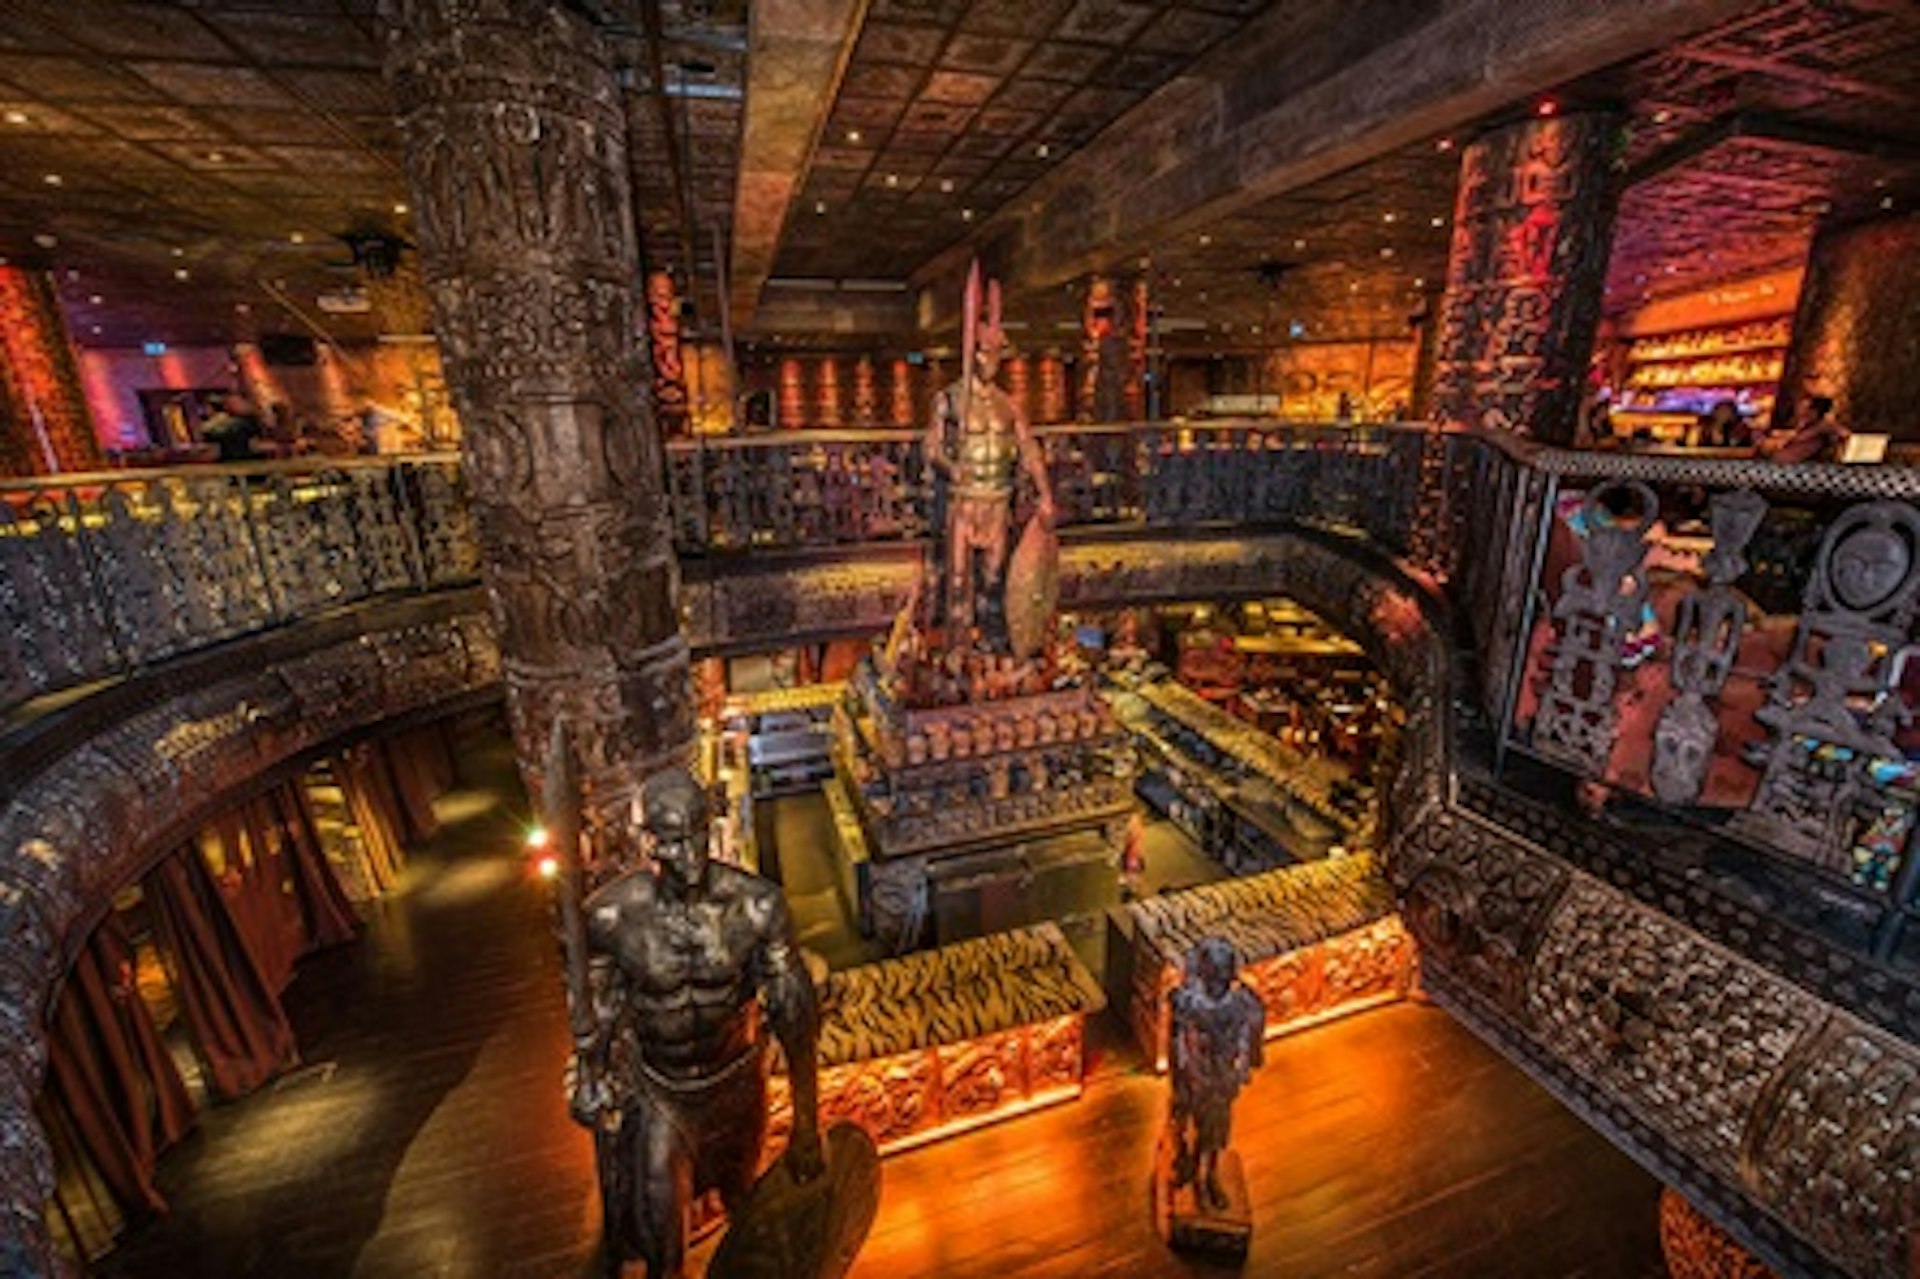 Burger, Fries and Cocktail for Two at London's Shaka Zulu 2